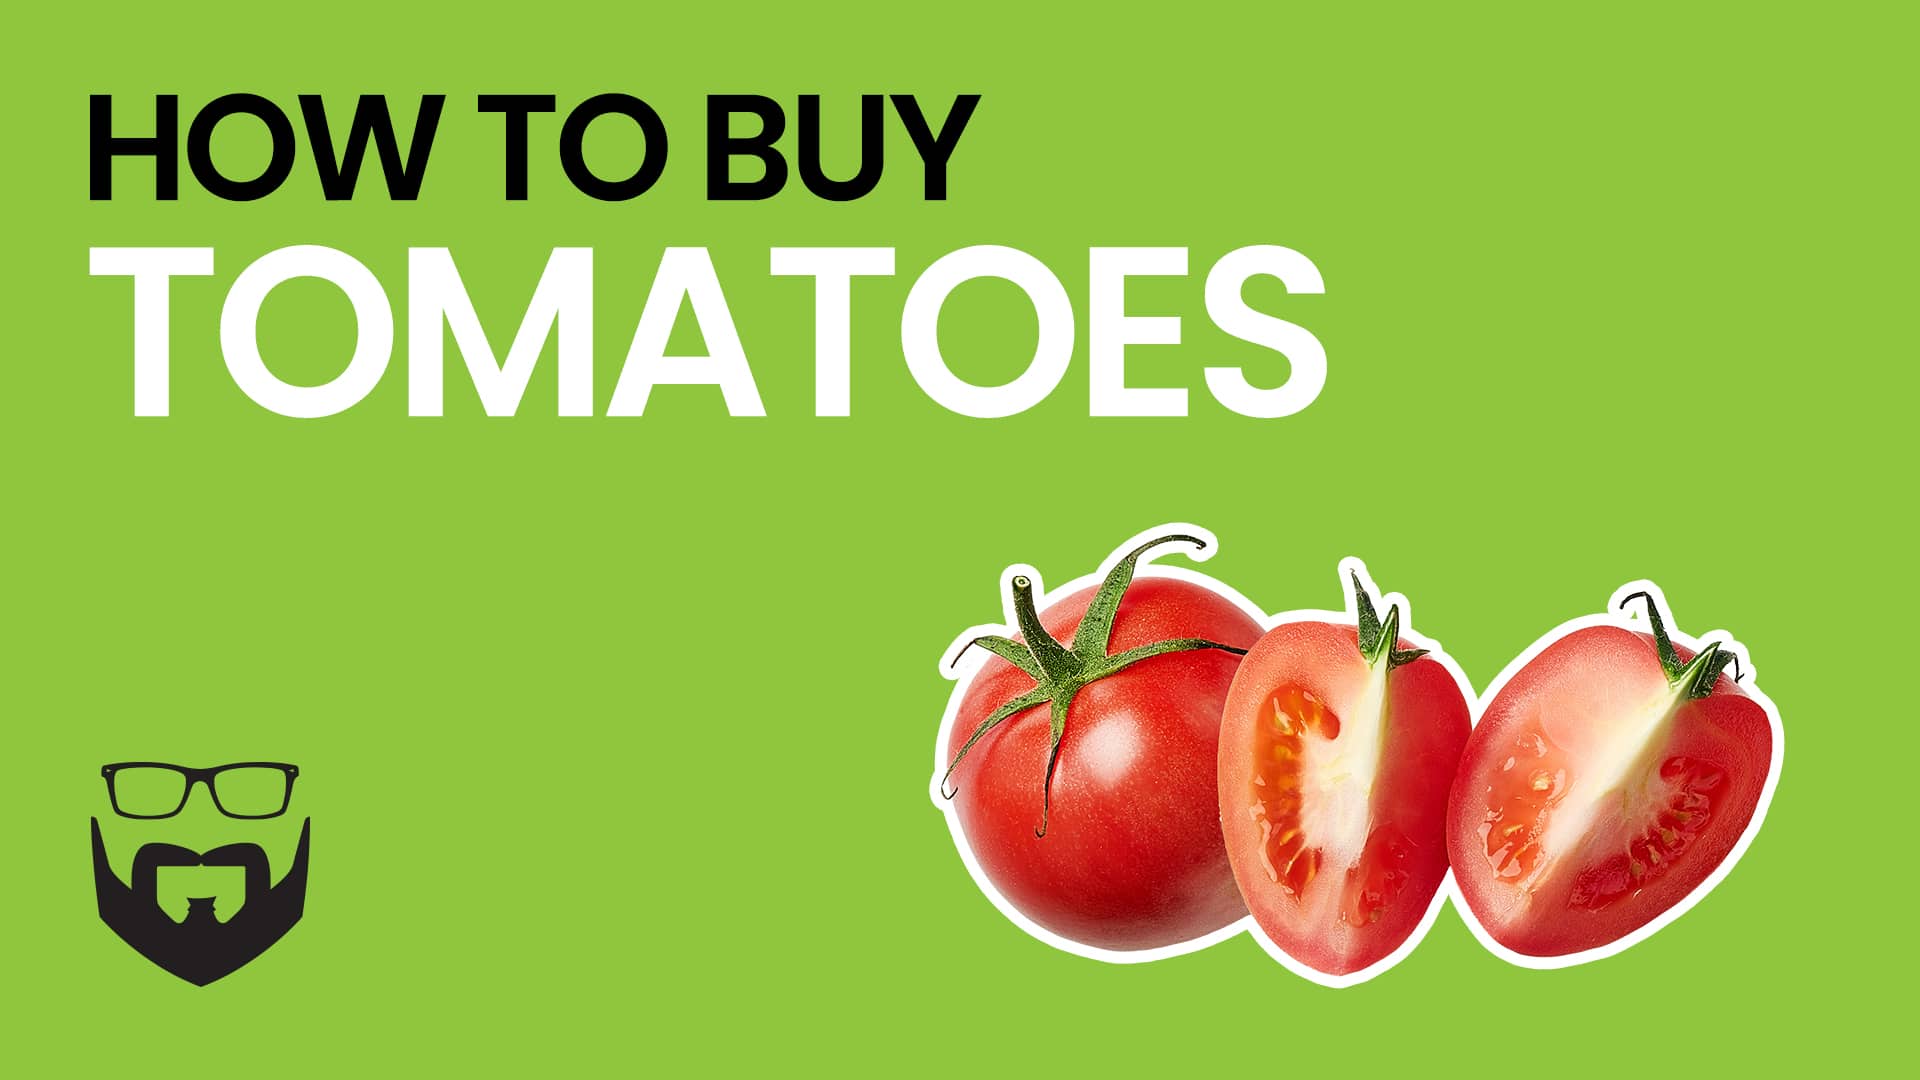 How to Buy Tomatoes Video - Green